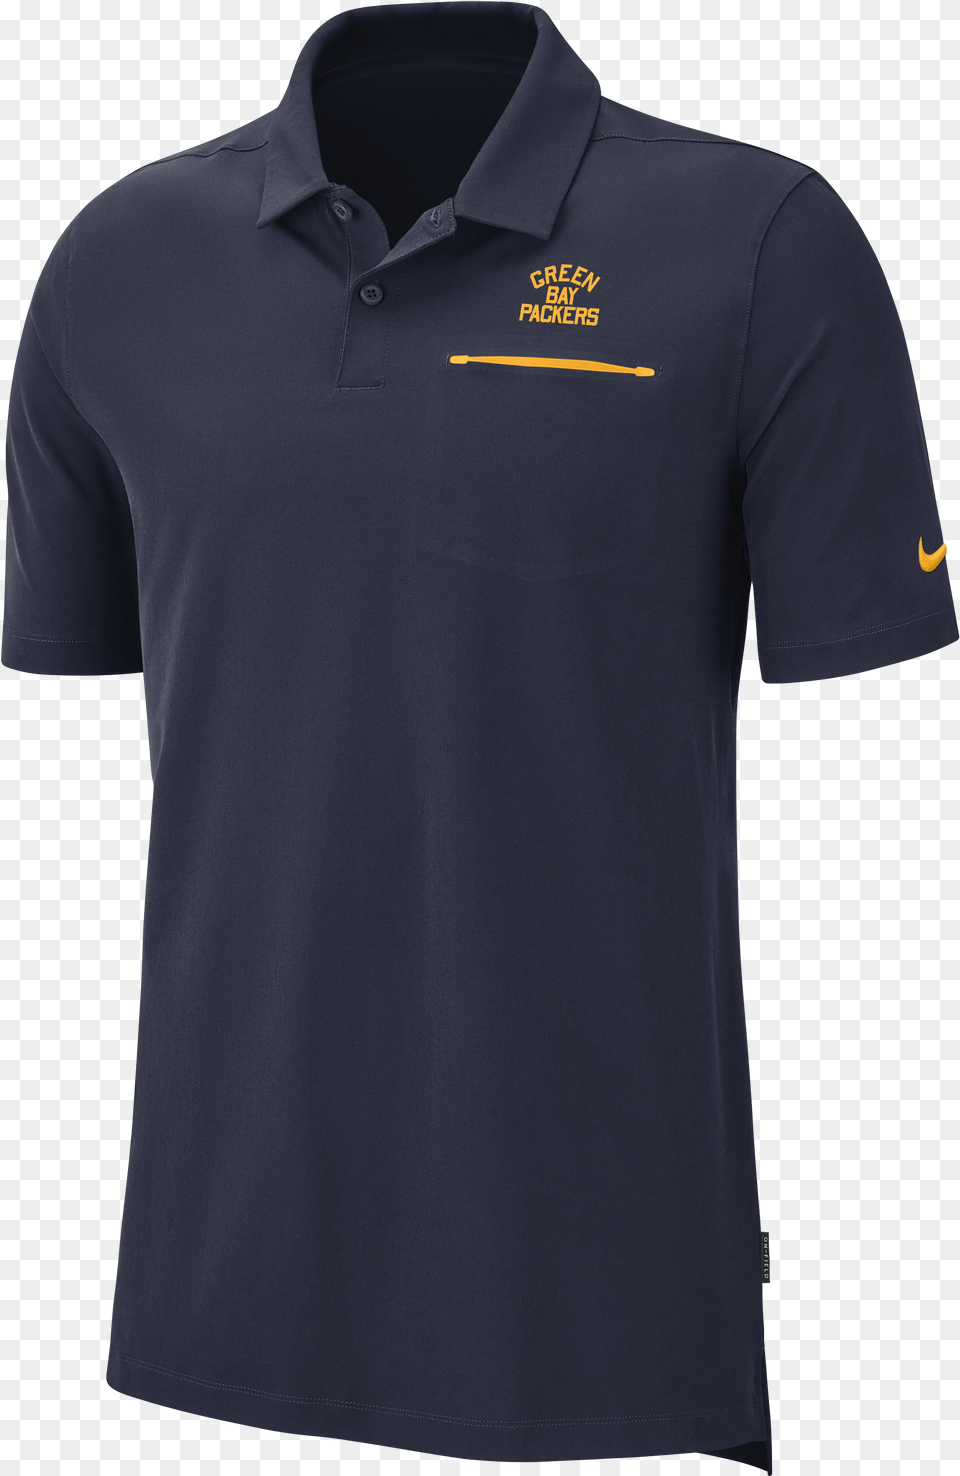 Green Bay Packers Navy Dry Polo Polo Shirt, Clothing, T-shirt, Adult, Male Png